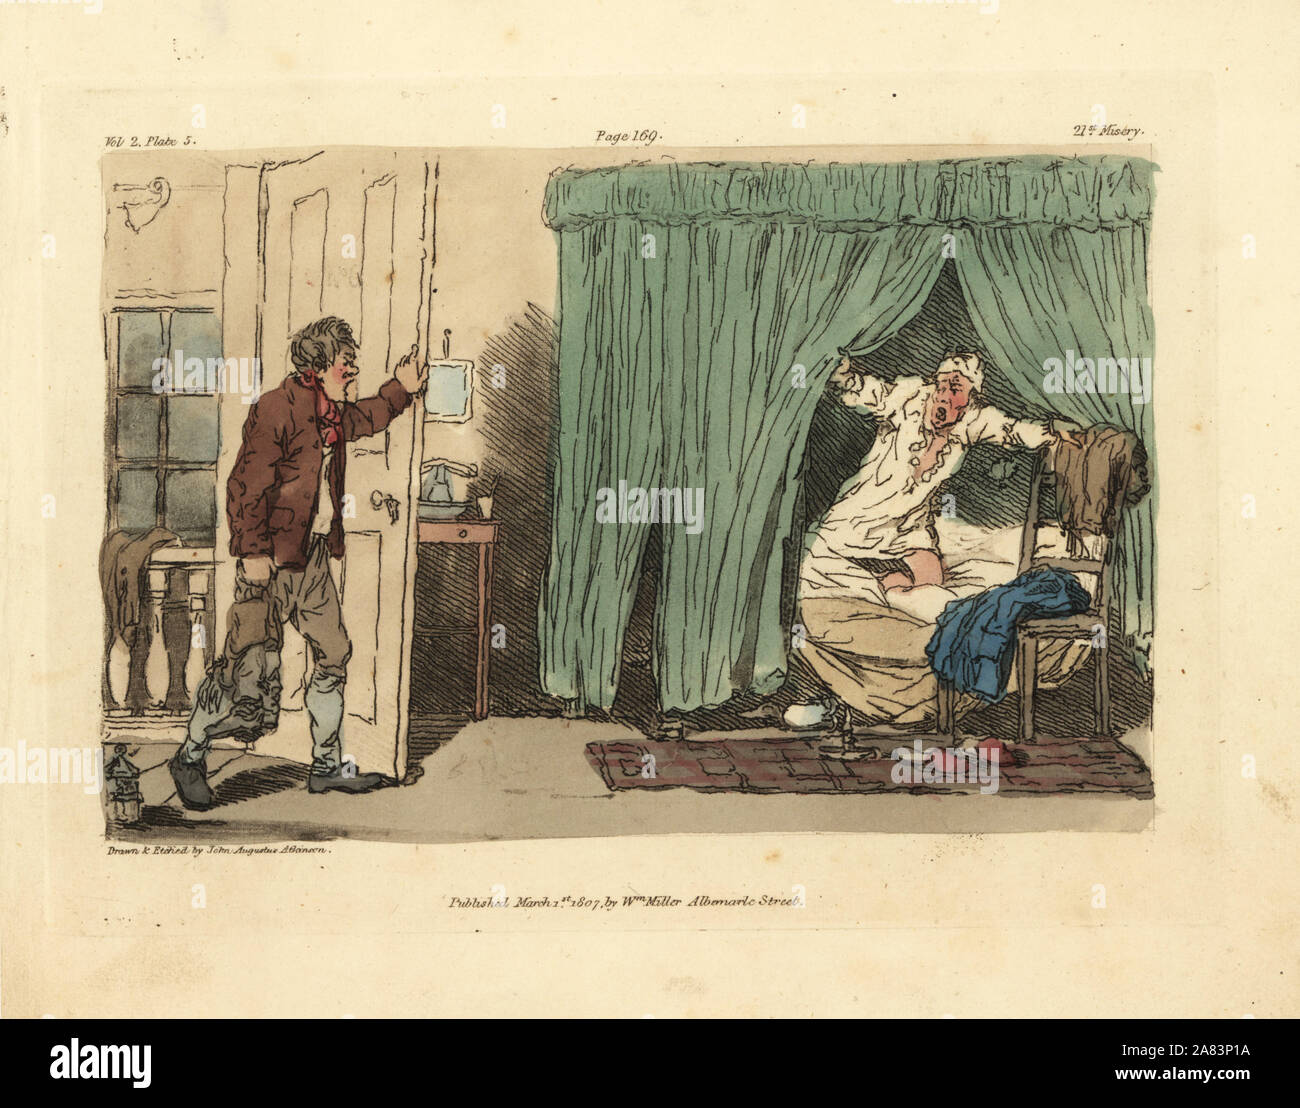 Traveller in a bedroom awoken every hour by the innkeeper calling for stage-coach passengers. Handcoloured copperplate drawn and etched by John Augustus Atkinson from Illustrations of the Miseries of Human Life, William Miller, London, 1807. Stock Photo